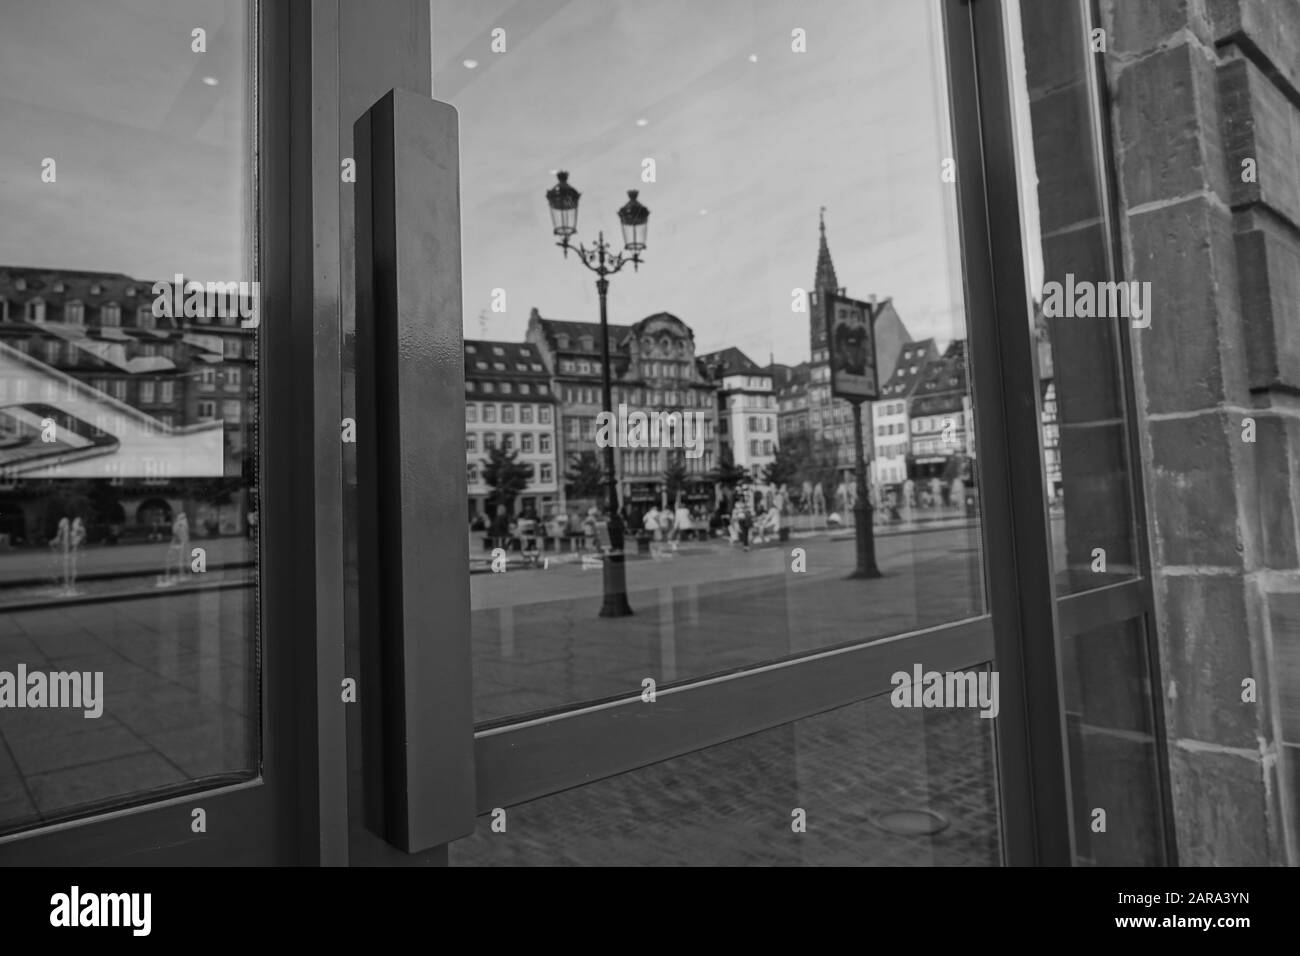 Street reflection on glass door, Old Lamp, Strasbourg, Alsace, France, Europe Stock Photo